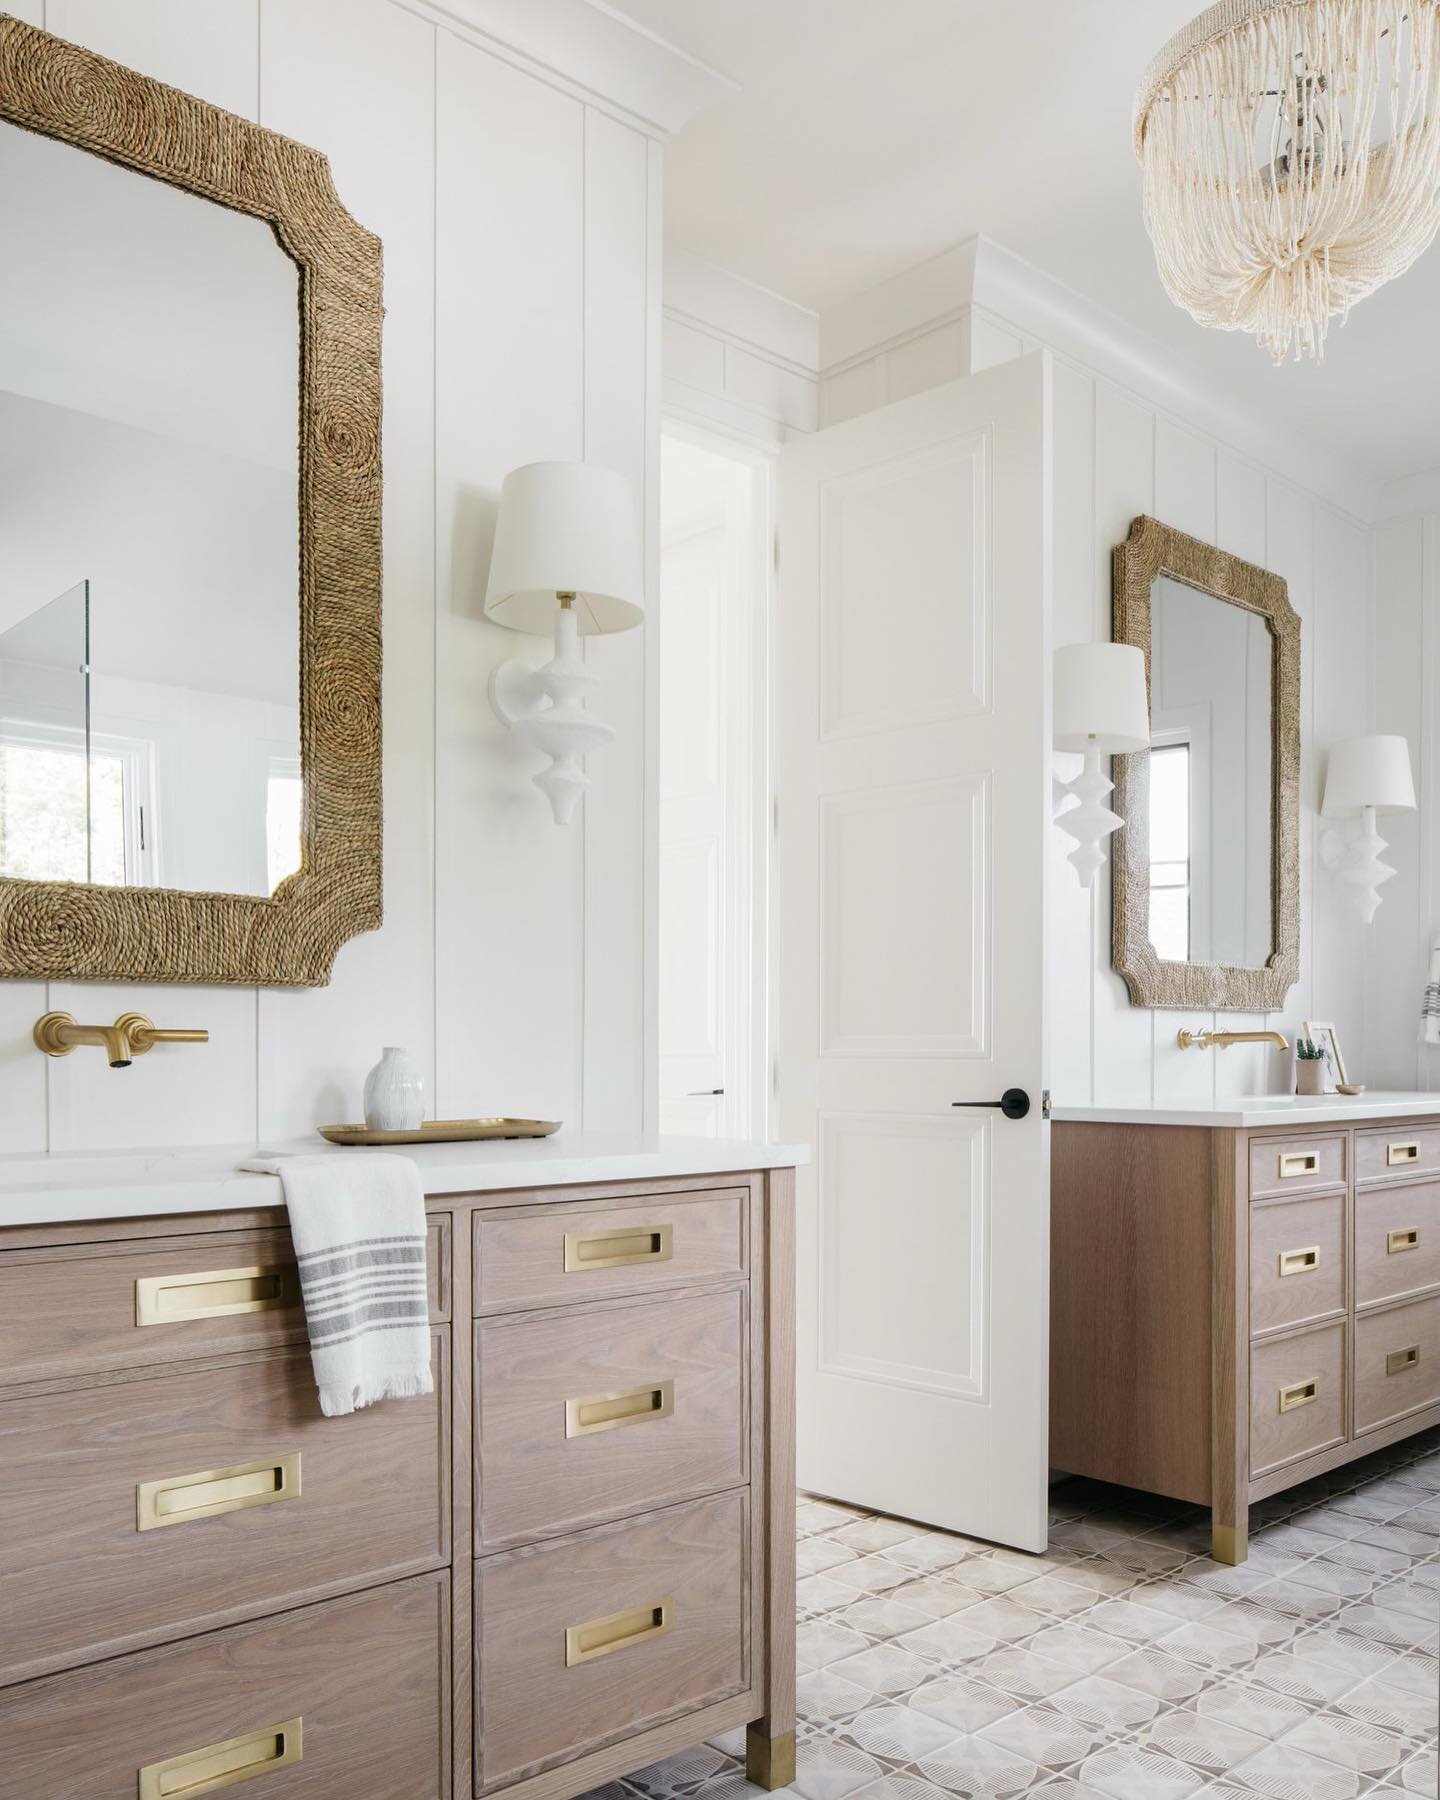 &ldquo;The best rooms have something to say about the people who live in them.&rdquo; - David Hicks 

Loving this bathroom that showcases one of our exclusive lines, @tabarkastudio
Customizable to fit any color-way, personality, or project! These uni